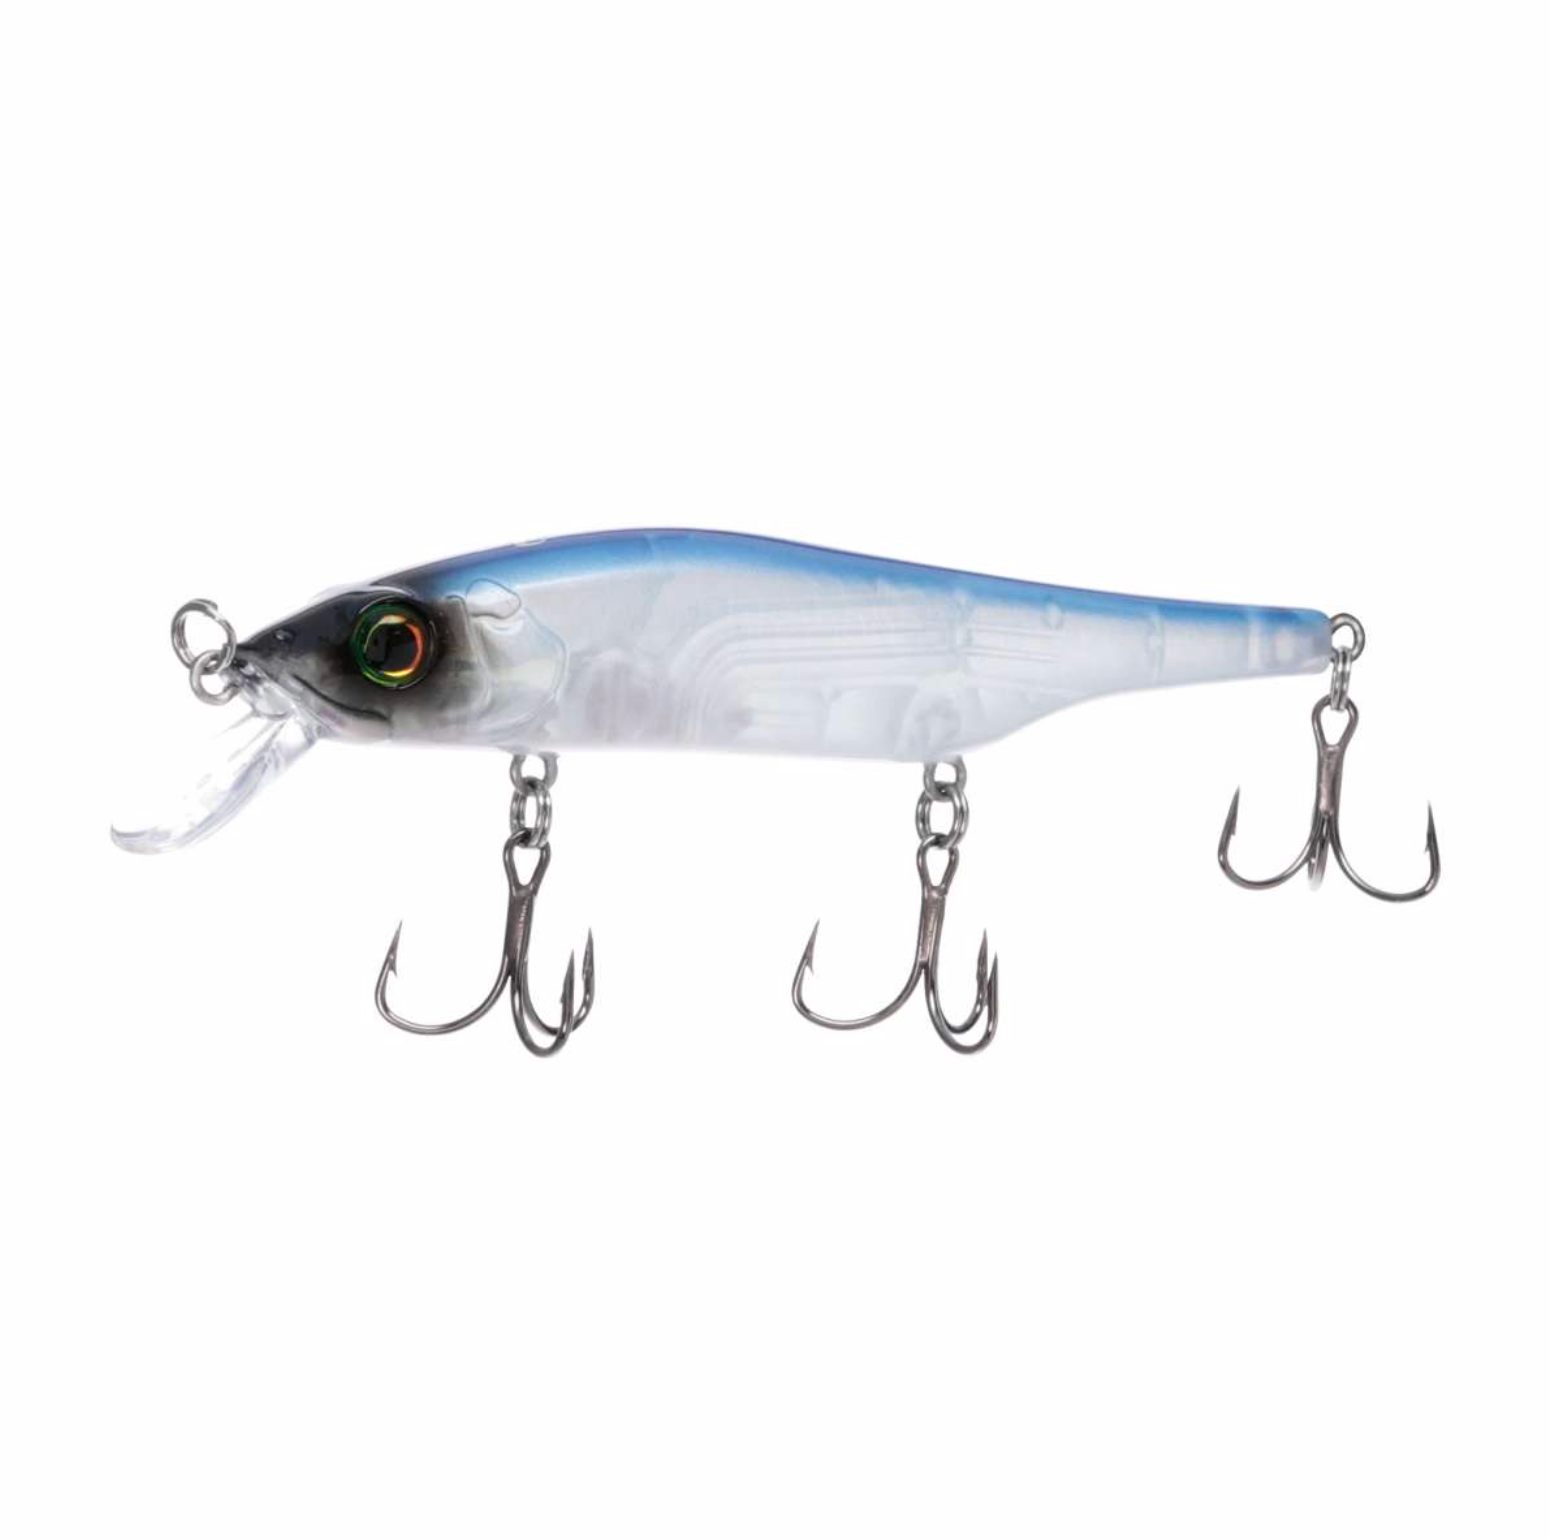 Pearson Plug 7.5 Suicide Sucker Natural PerchThese 7.5 glide jerk baits  have a large body shape, and wide glide walk-the-dog-action. The jerk bait  has thicker profile than minnow jerk baits. These baits